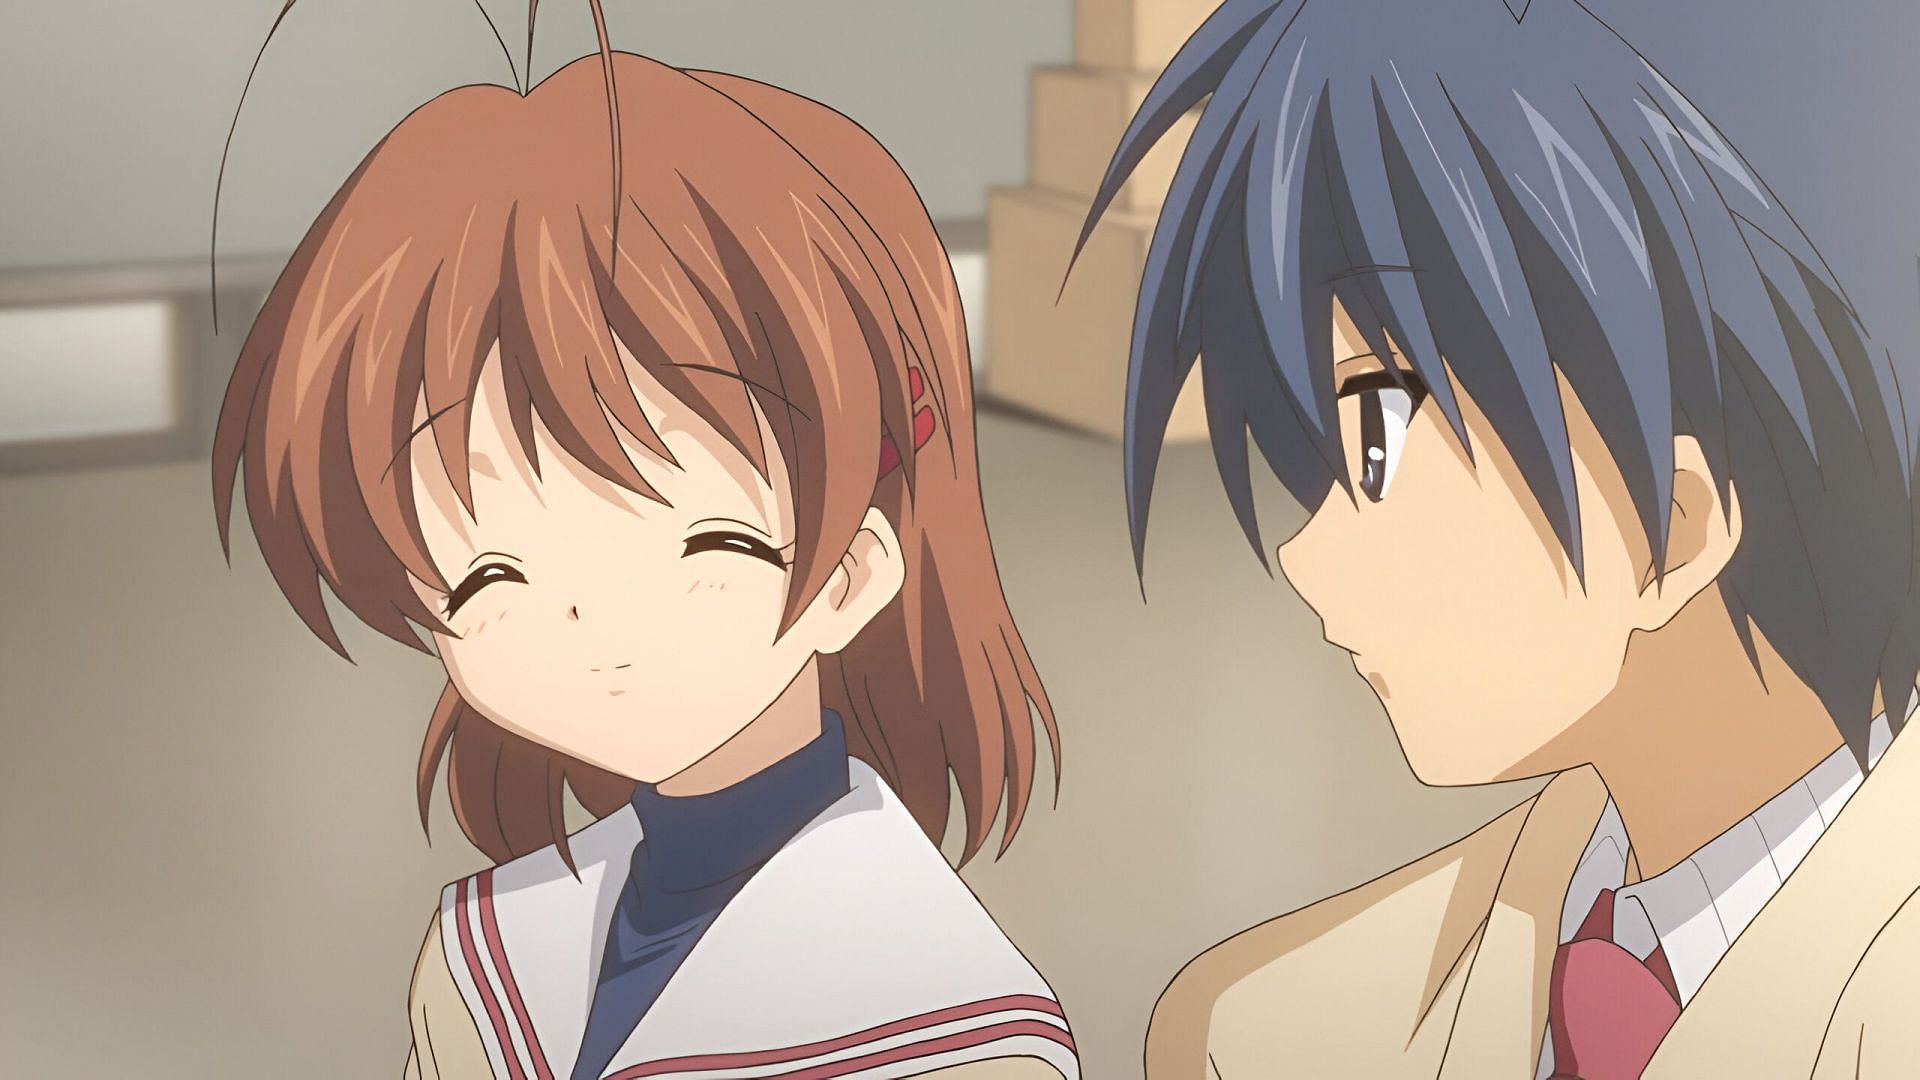 Nagisa (left) and Tomoya (right) as seen in the anime (Image via KyoAni)